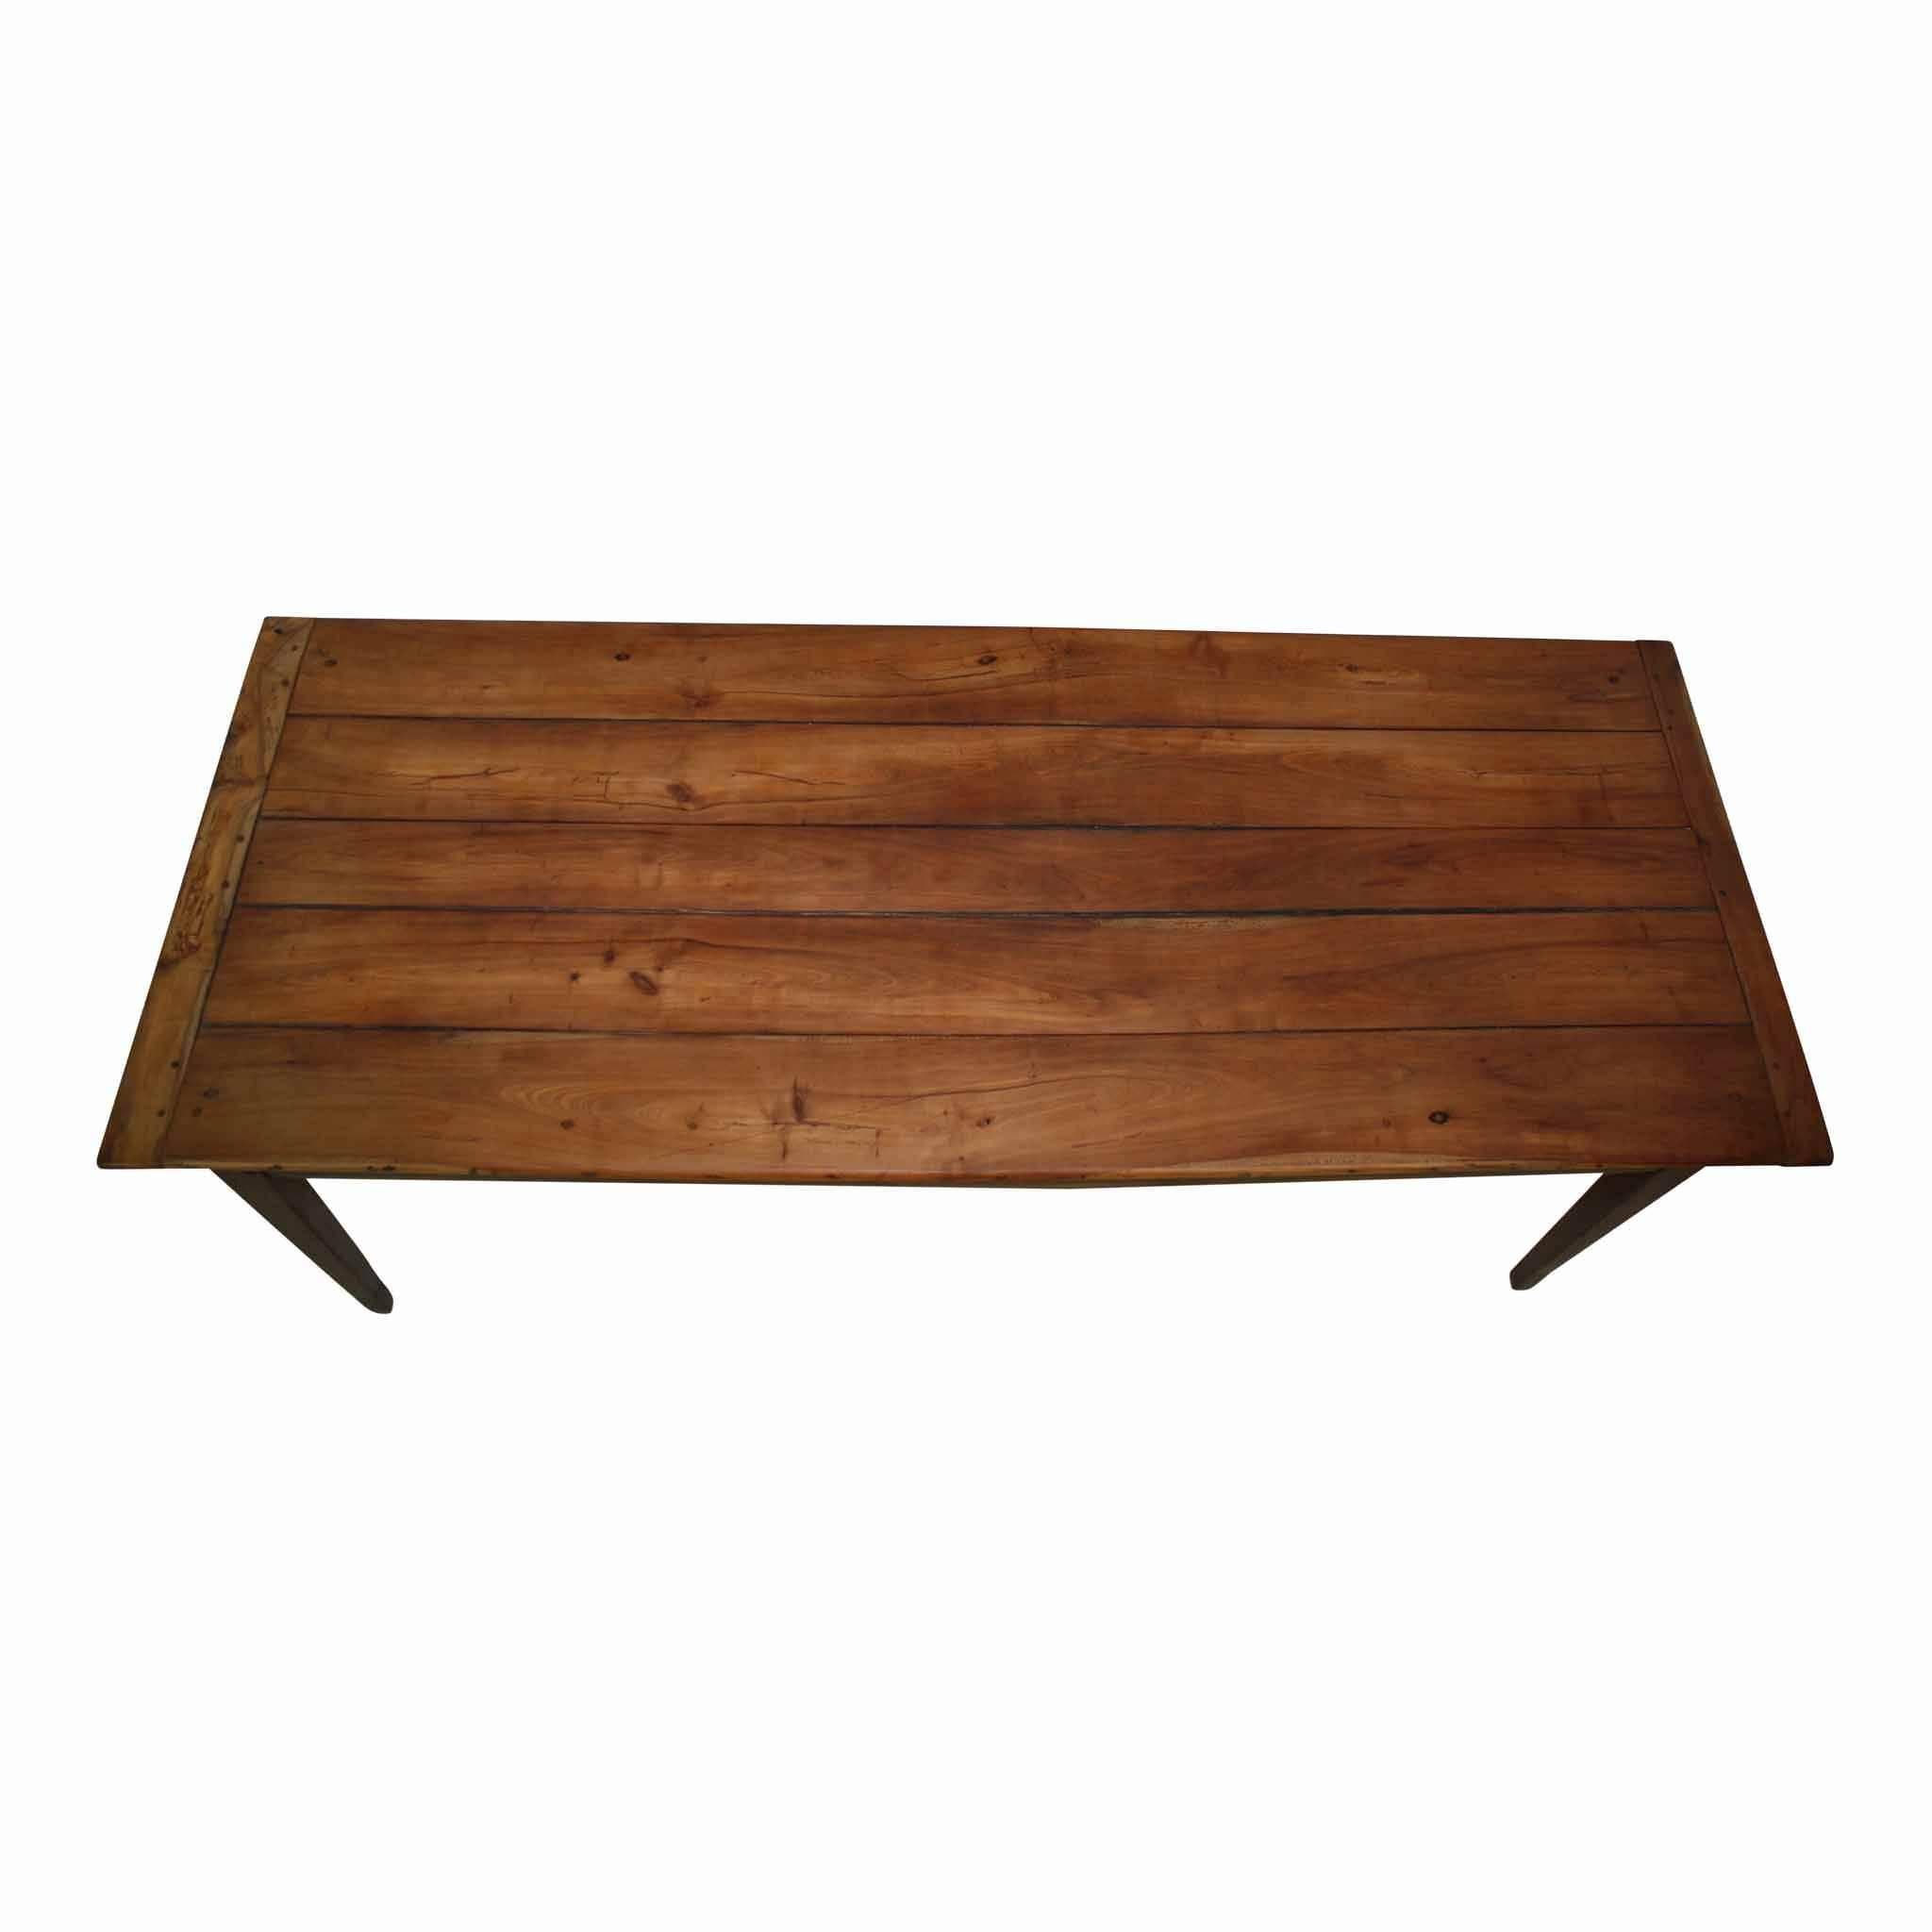 This beautiful table is constructed of a cherrywood top with oak apron and legs. The table has one deep drawer and one faux drawer. Risers have been added to the table legs.